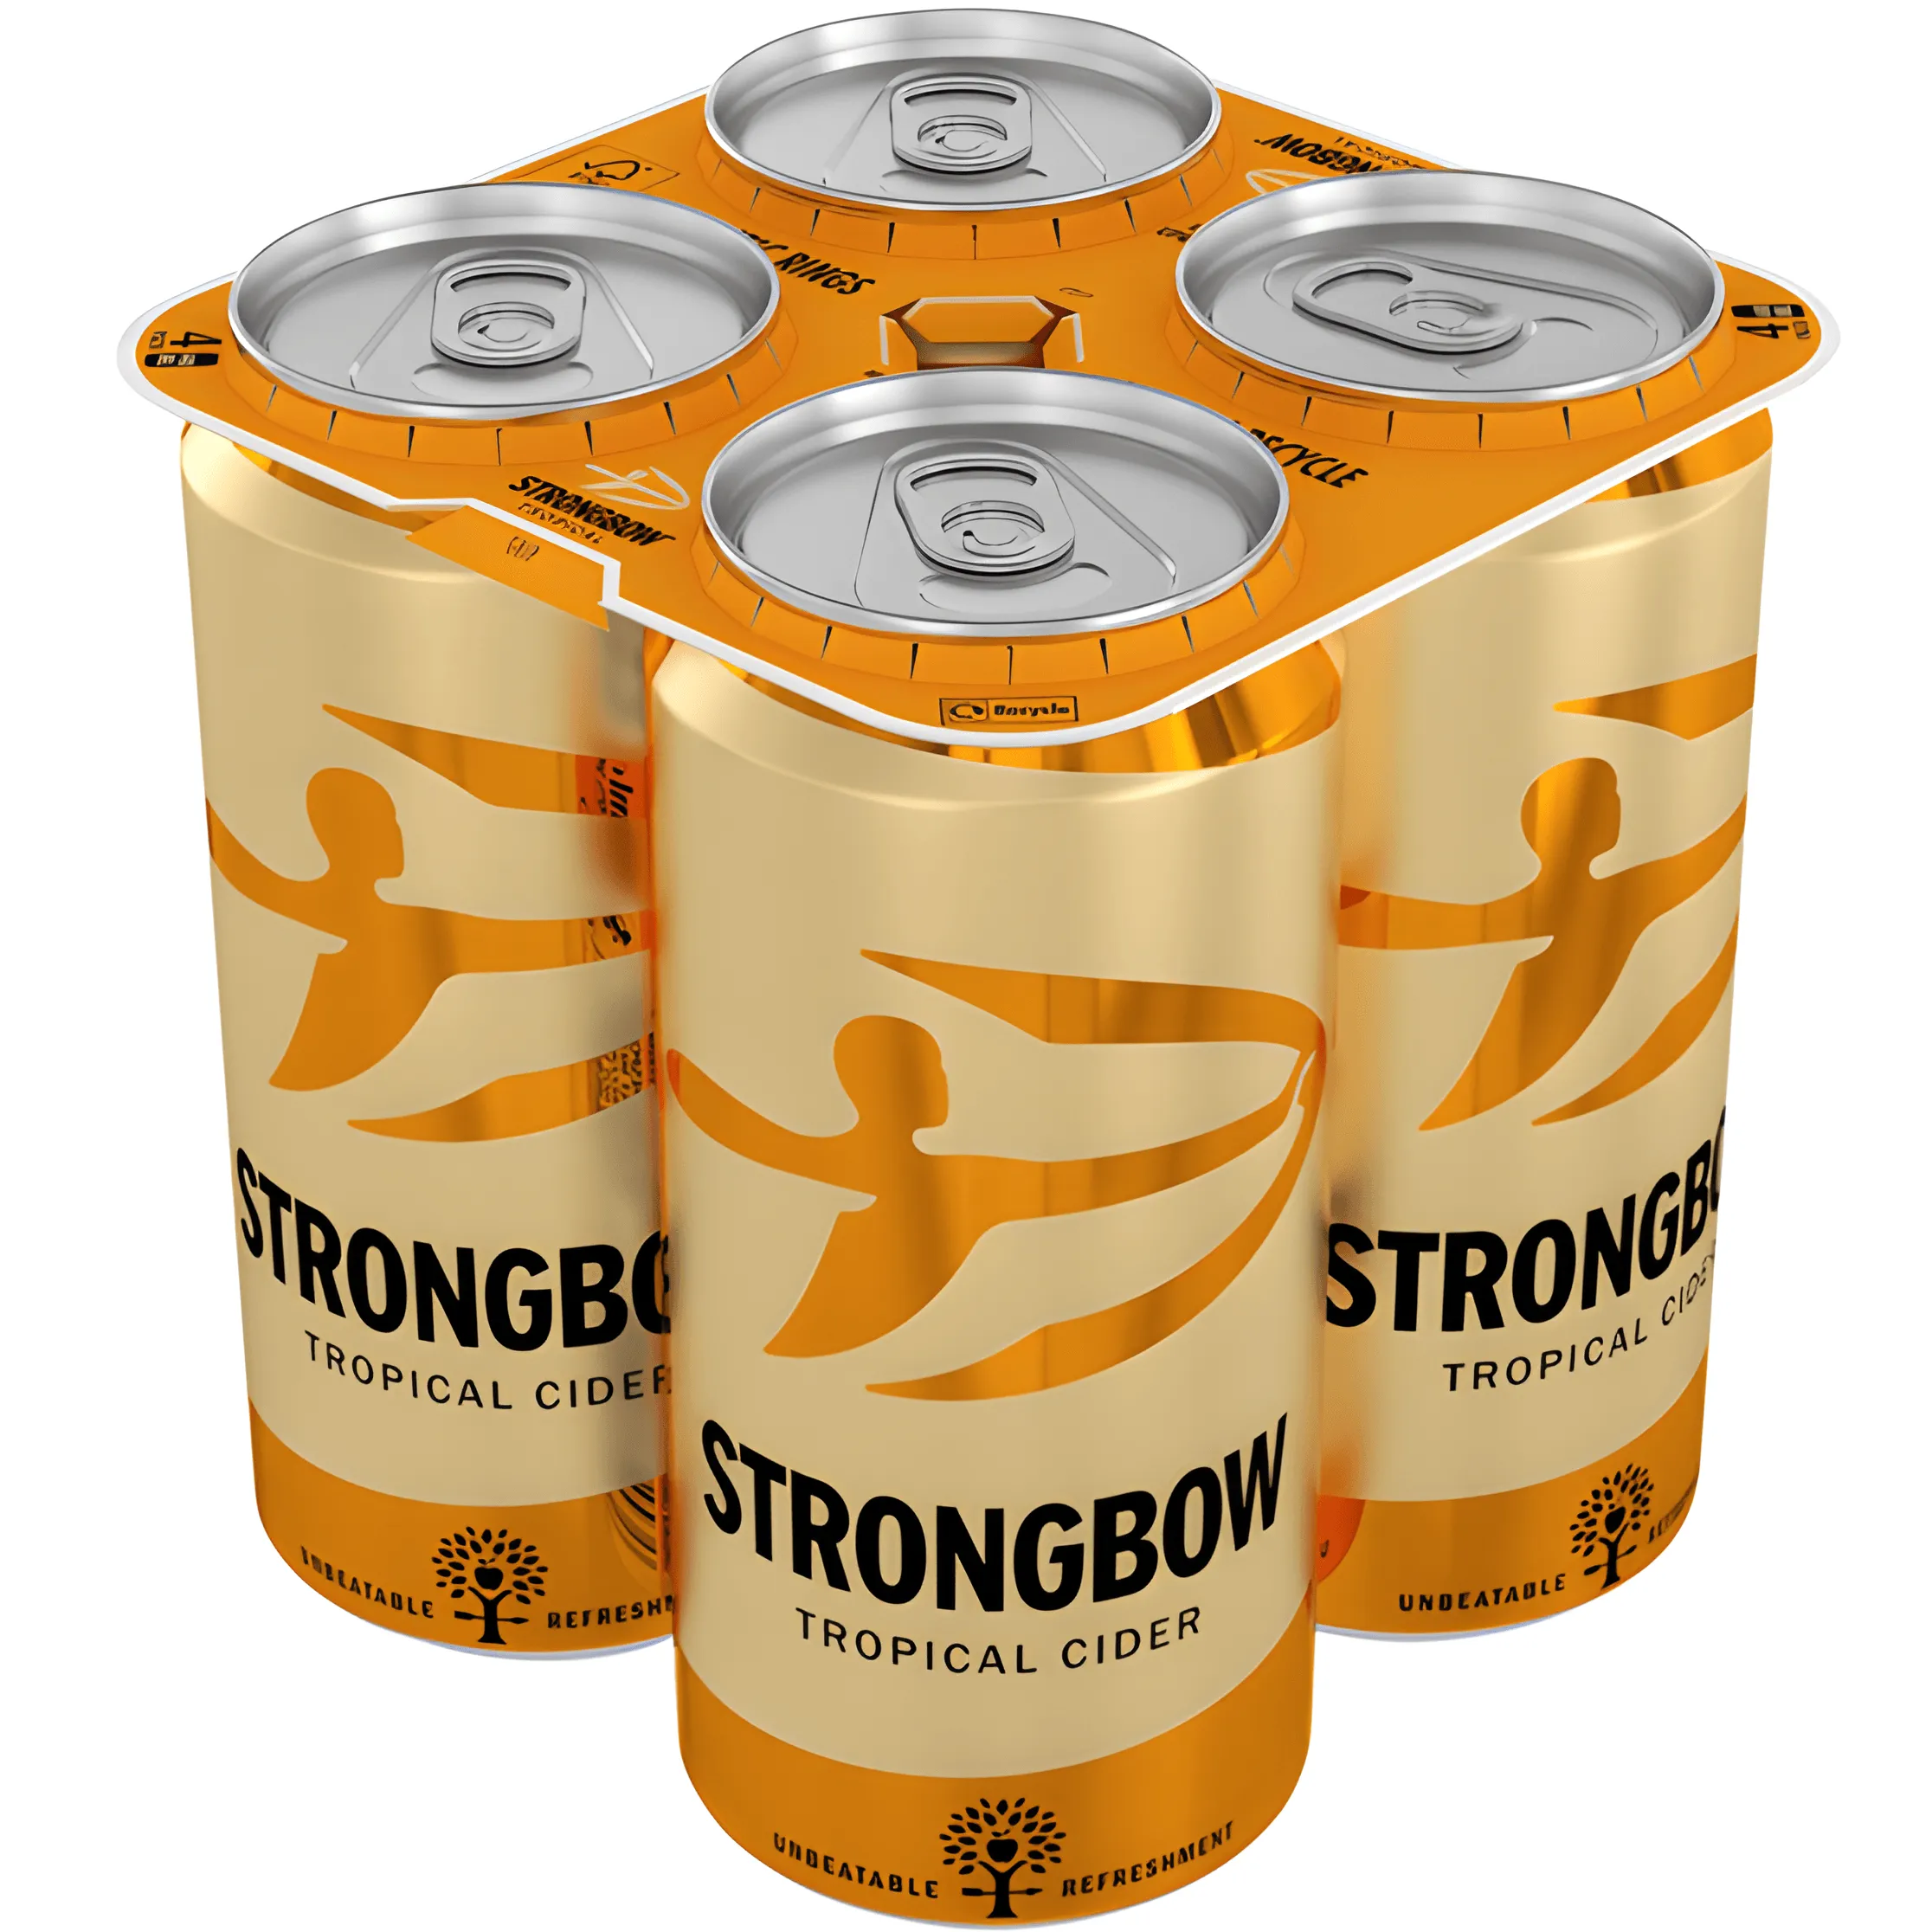 Free Strongbow Tropical Cider